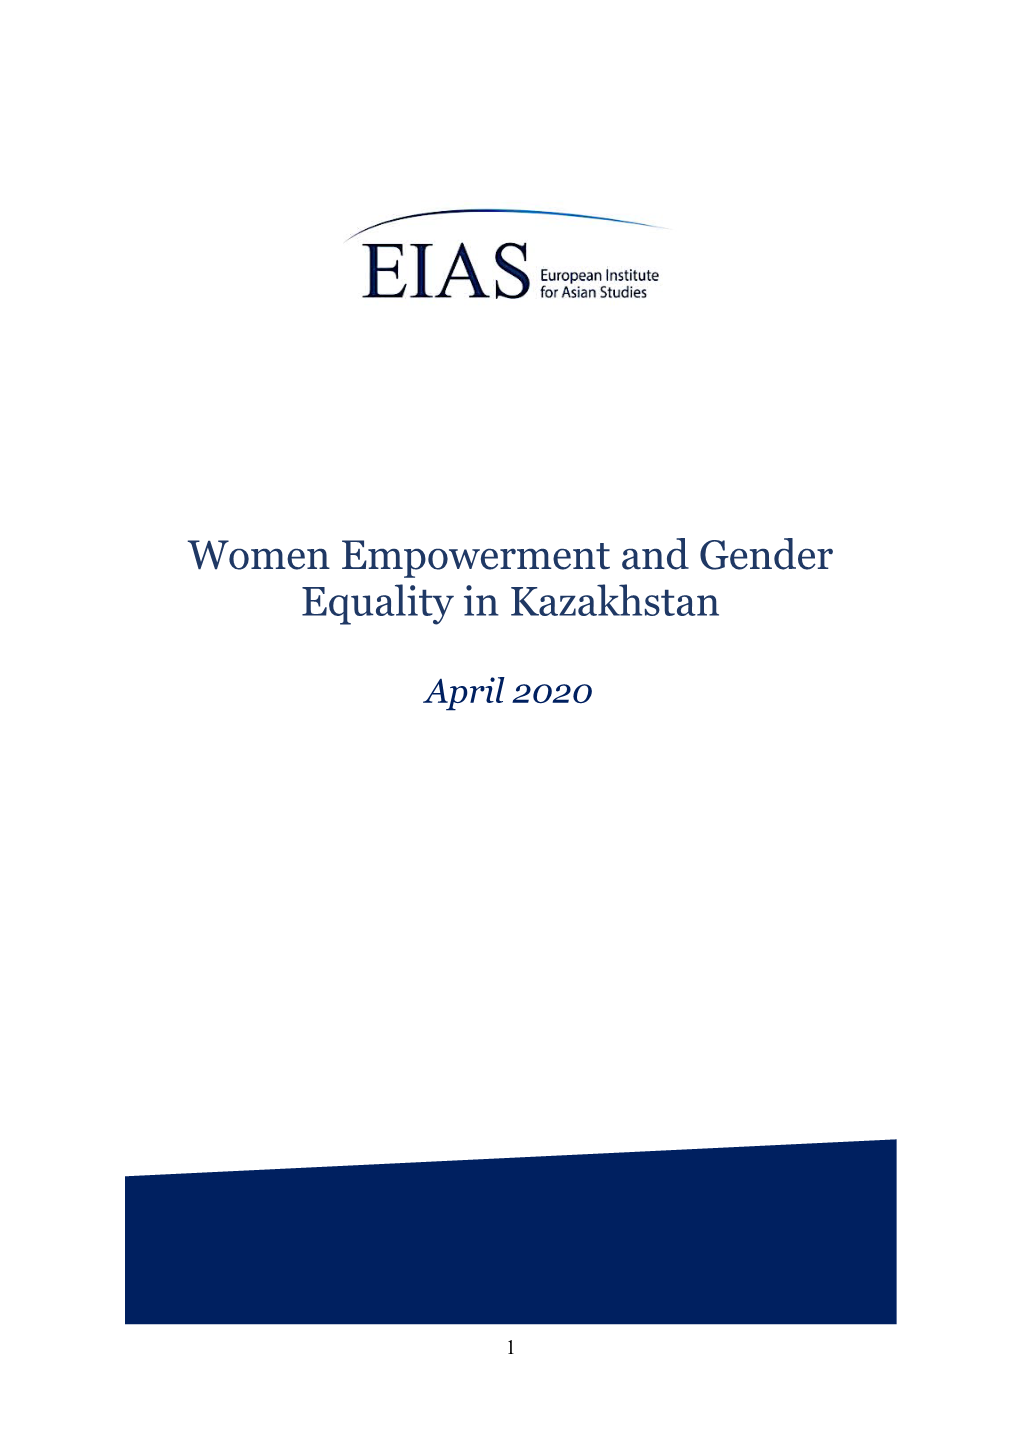 Women Empowerment and Gender Equality in Kazakhstan